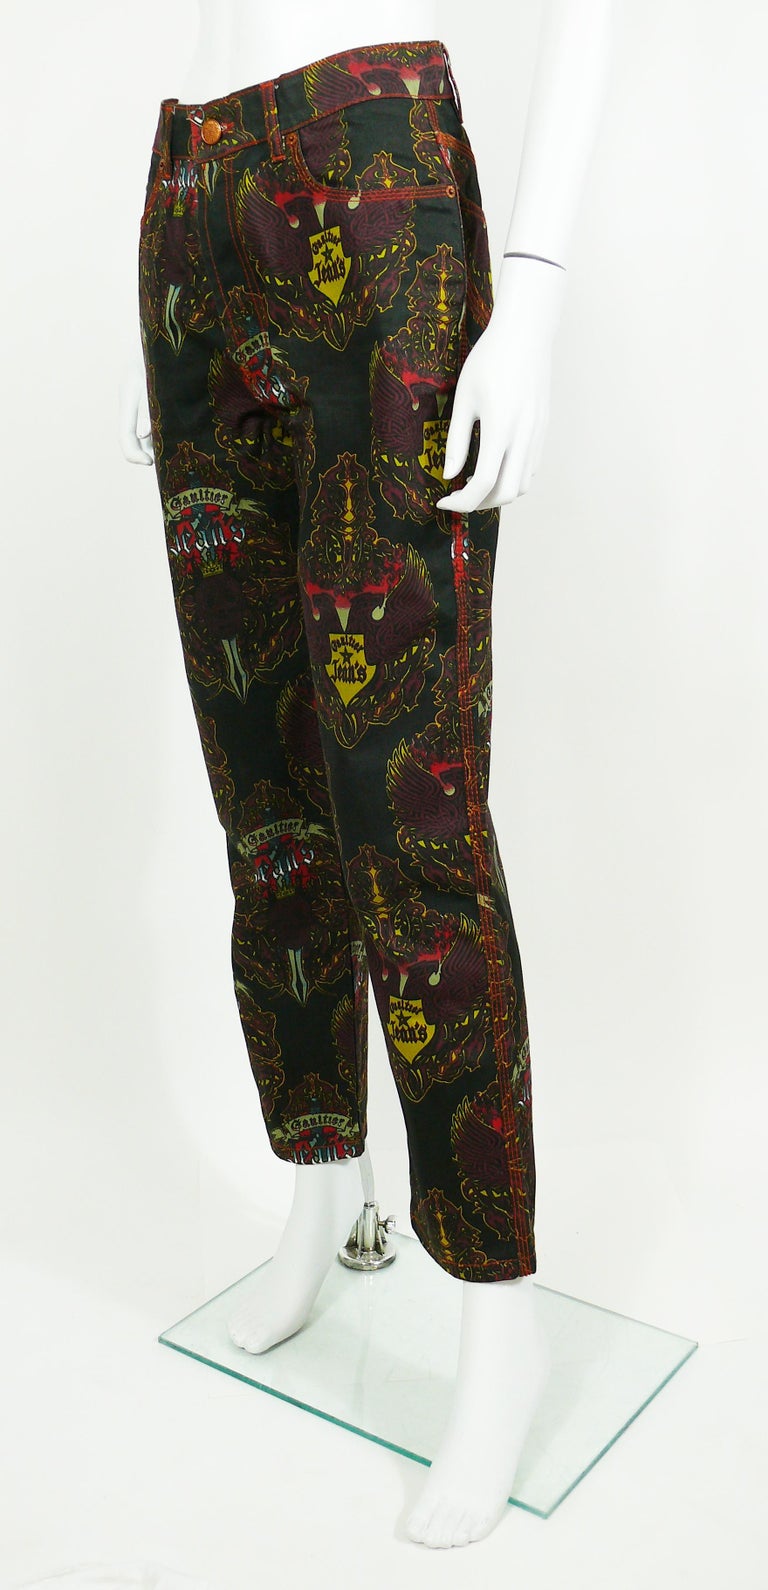 JEAN PAUL GAULTIER vintage black pants trousers featuring an opulent crowned skulls and eagles print design.

These trousers feature :
- Black background with multicolored designs throughout.
- Front buttoning.
- Copper toned signature buttons.
-